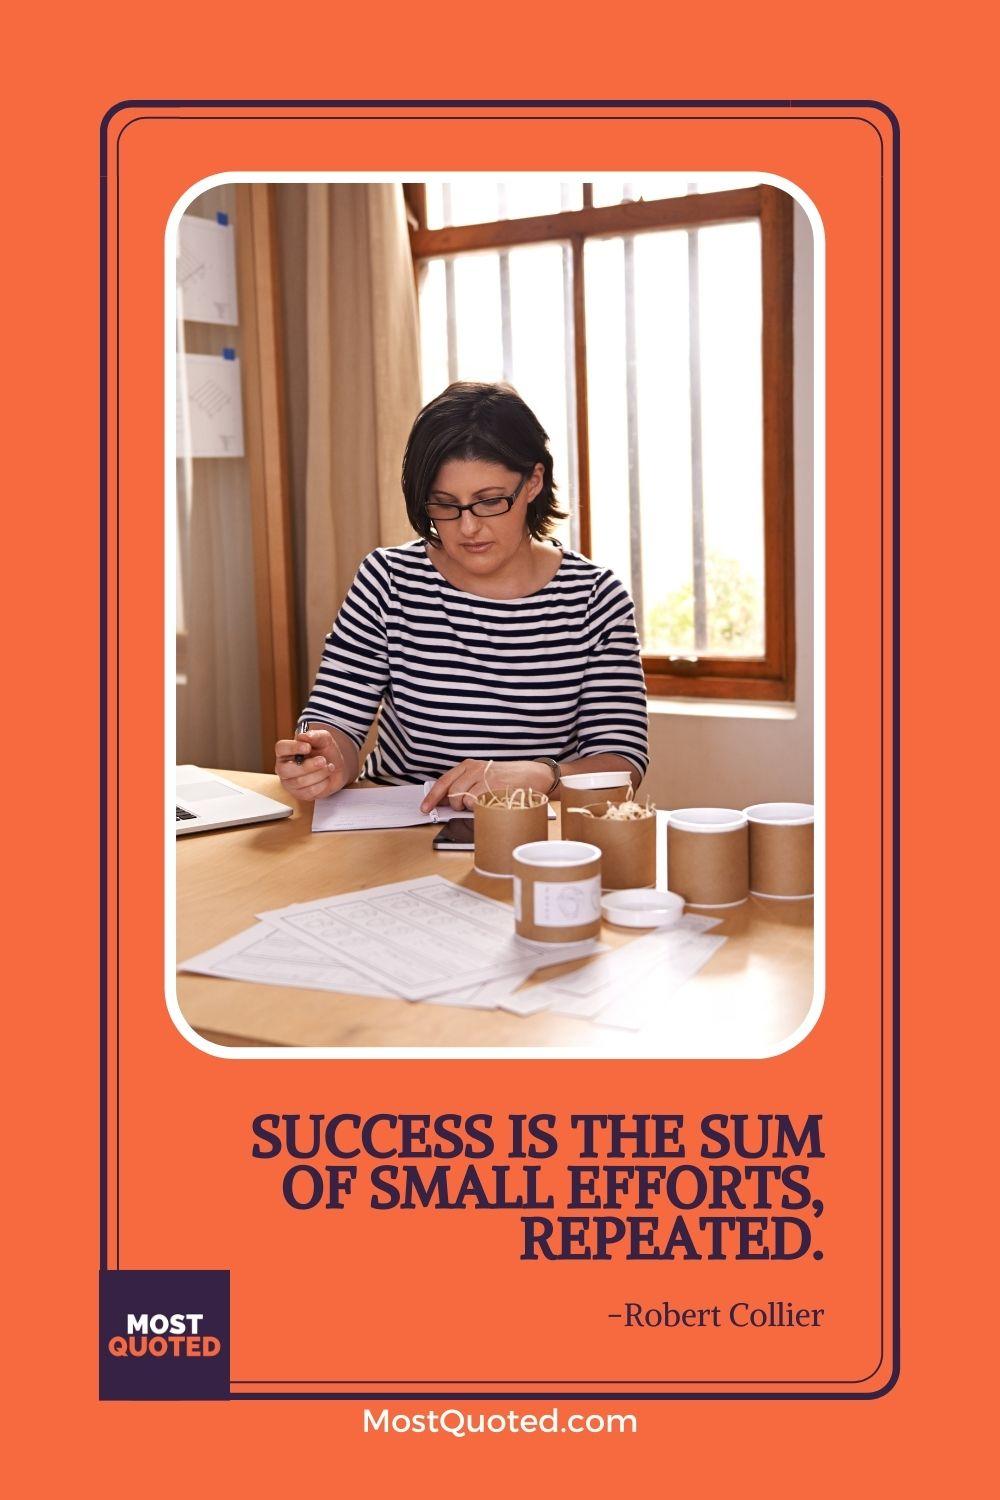 Success is the sum of small efforts, repeated. - Robert Collier